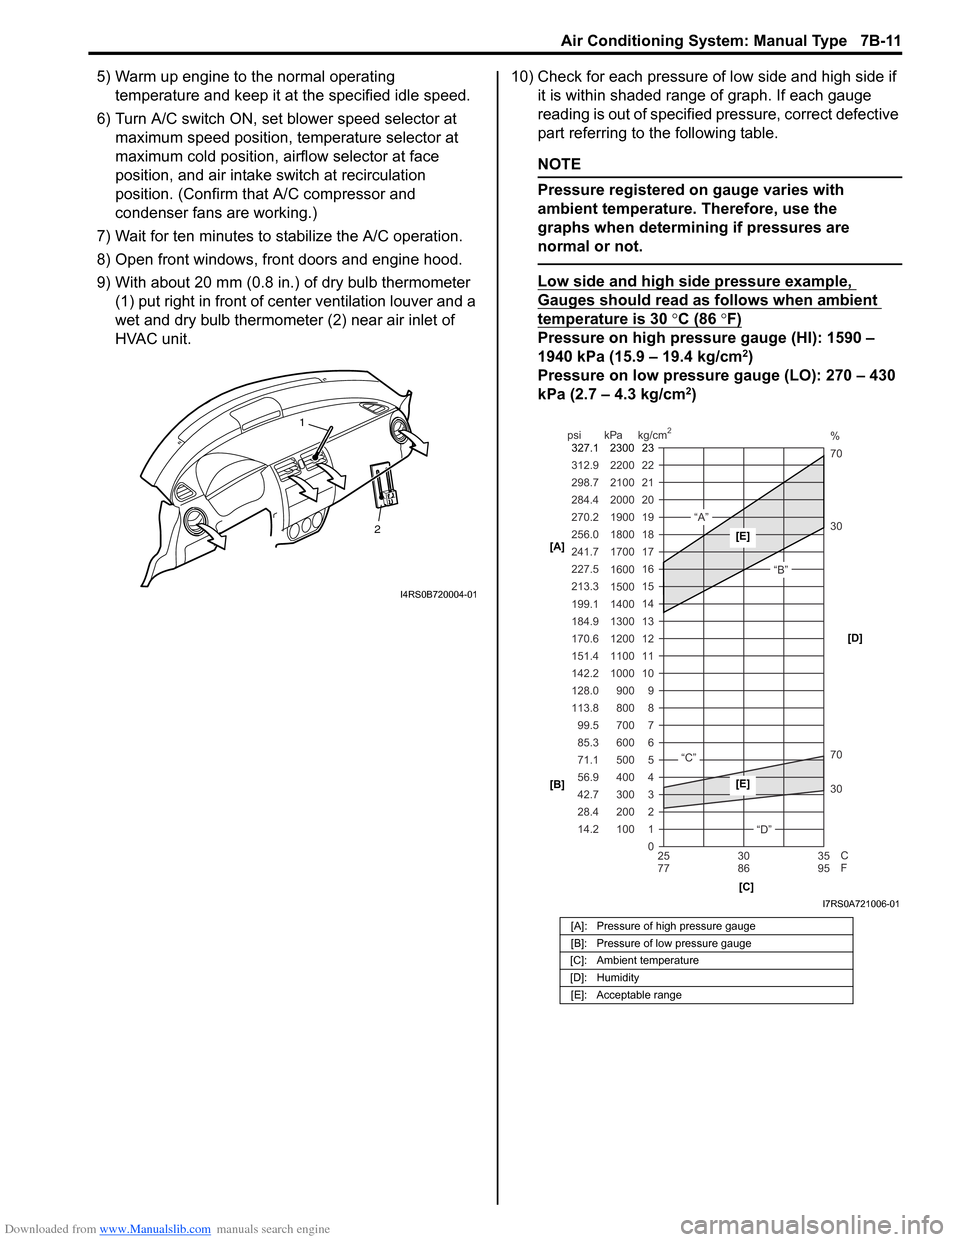 SUZUKI SWIFT 2006 2.G Service User Guide Downloaded from www.Manualslib.com manuals search engine Air Conditioning System: Manual Type 7B-11
5) Warm up engine to the normal operating temperature and keep it at the specified idle speed.
6) Tu